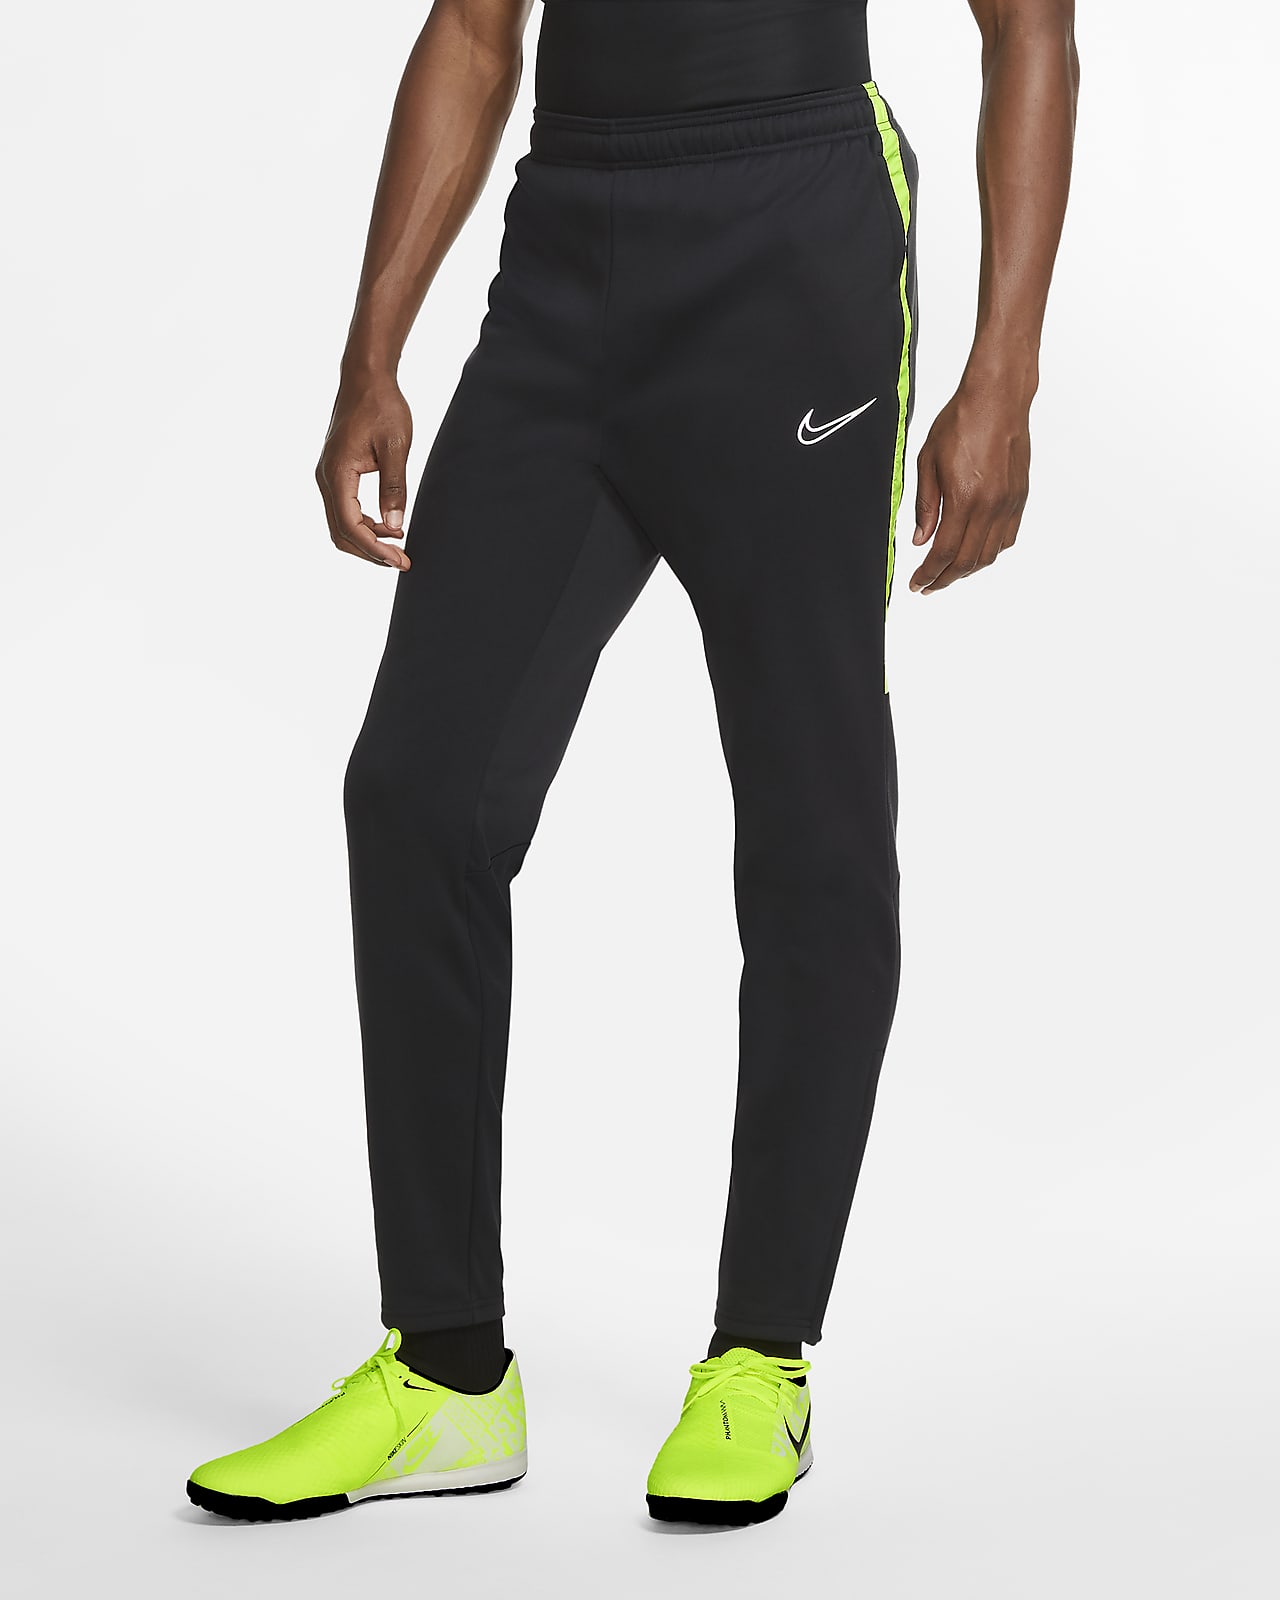  Nike Therma Fit Academy Winter Warrior Men's Knit